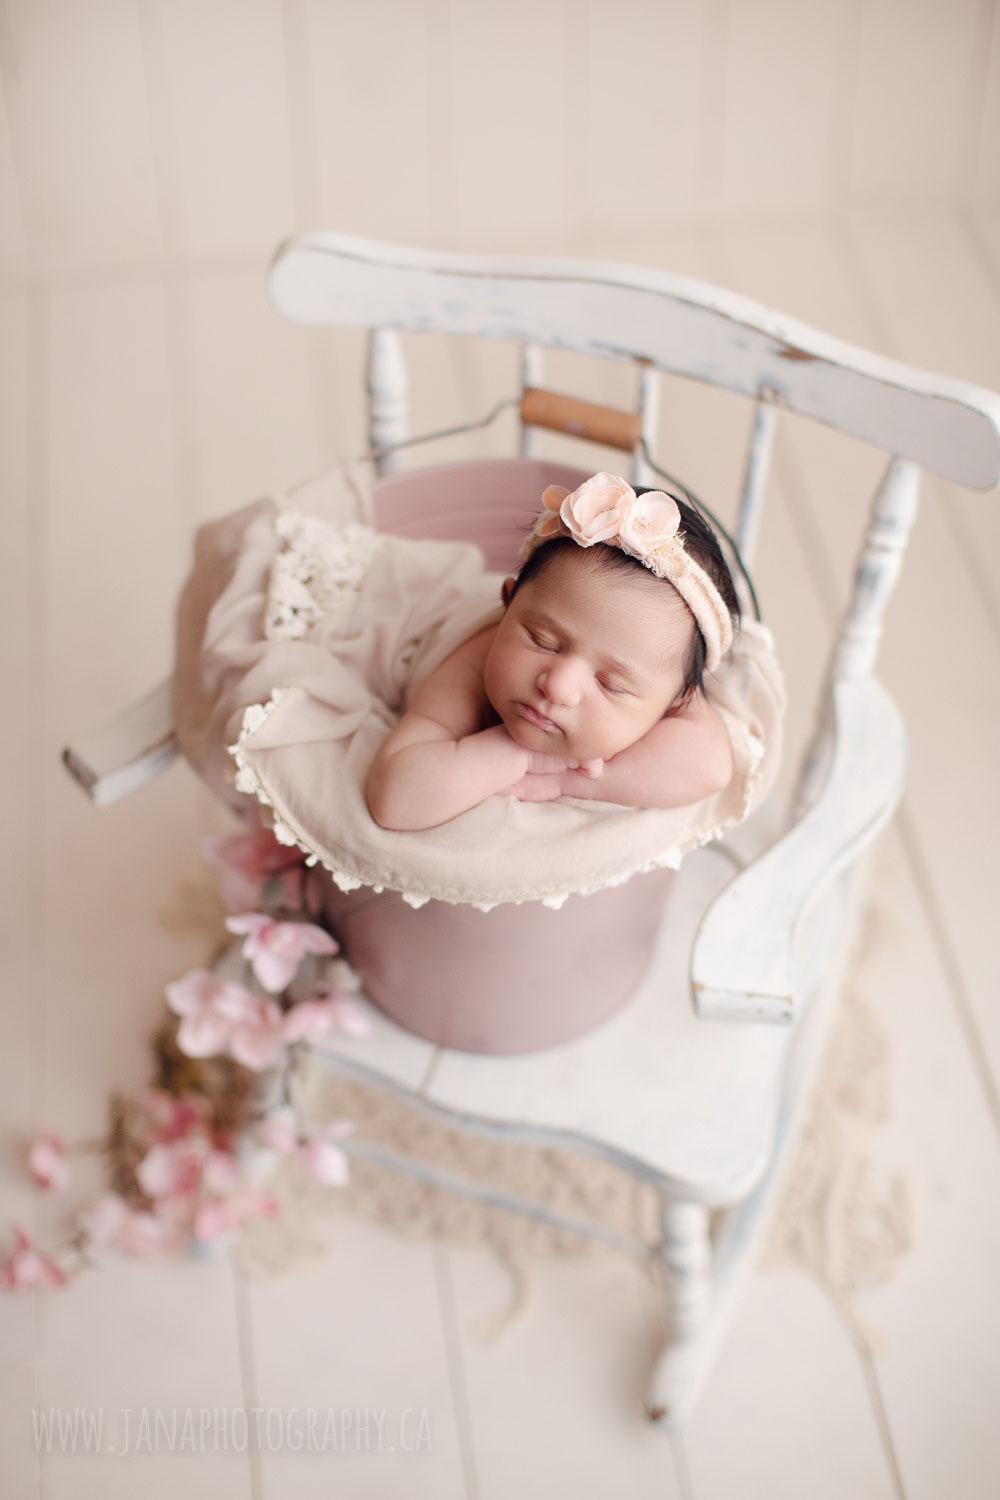 newborn baby girl in a pink bucket and white chair - Vancouver - janaphotography